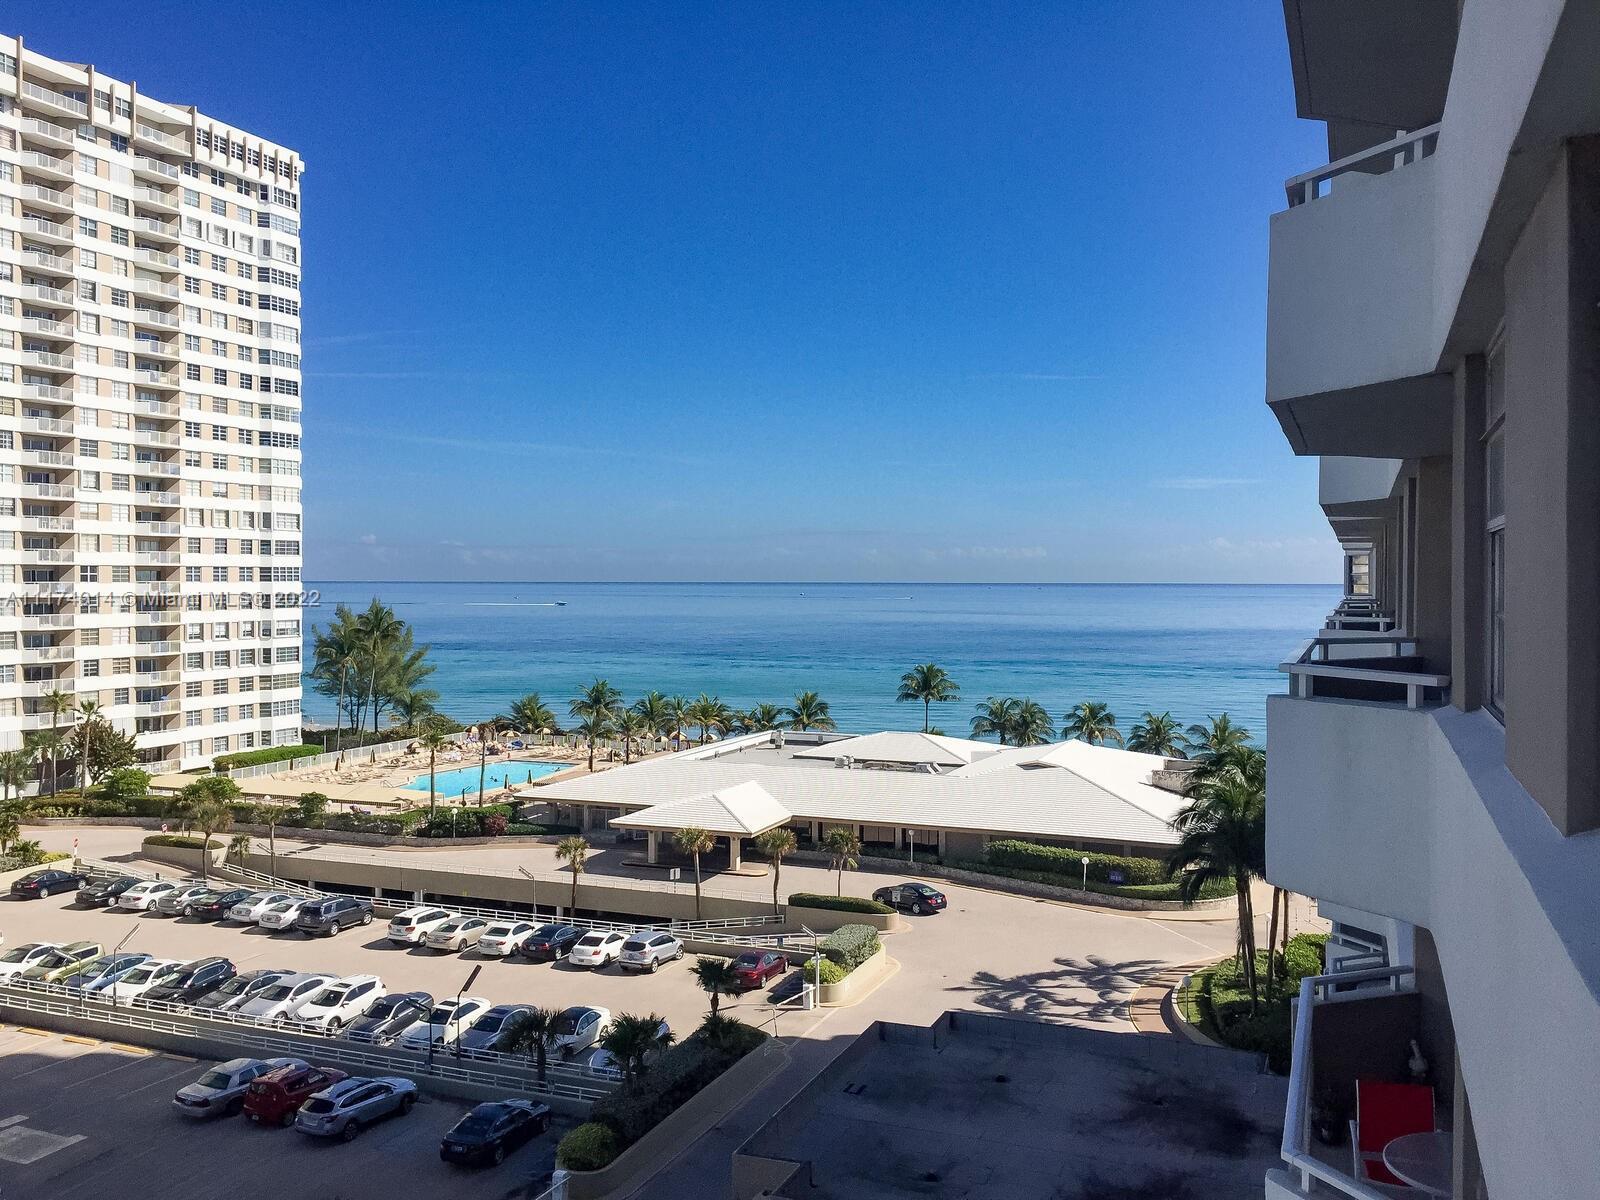 1 Br 1.5 Bath on the Ocean, Unobstructed Ocean, facing north with wide open views. Large Terrace wit